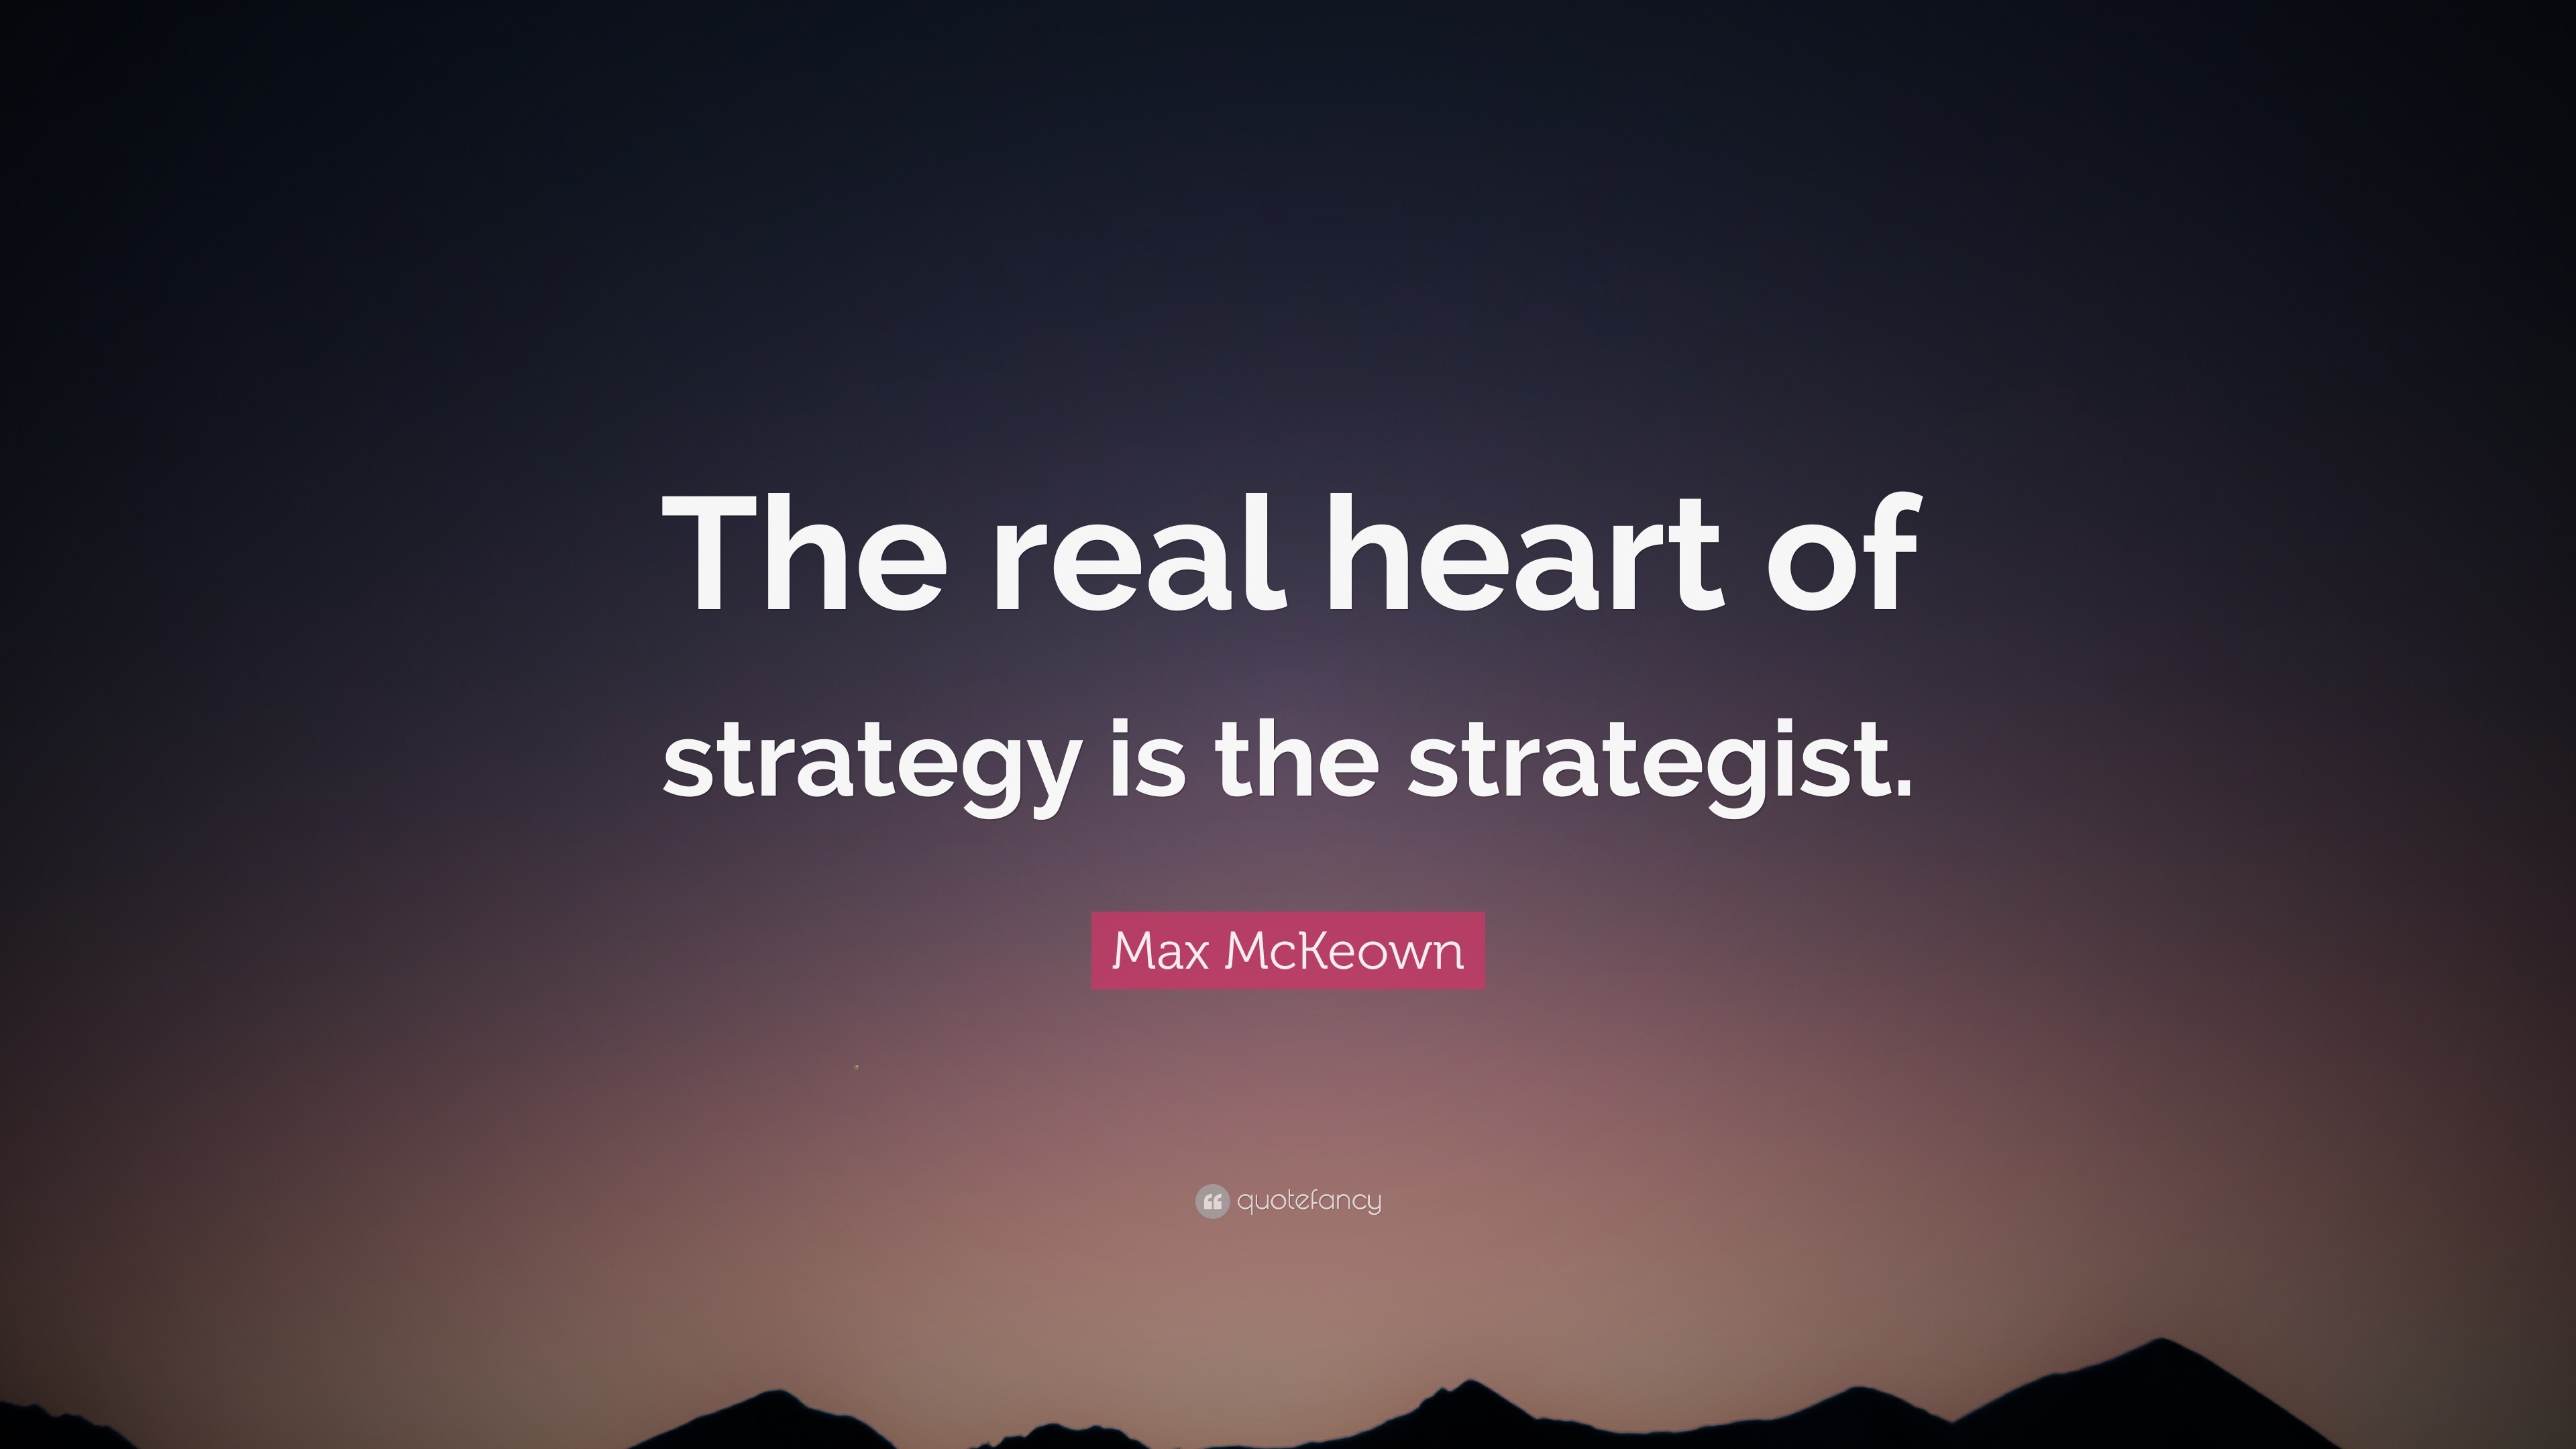 Max McKeown Quote The real heart of strategy is the strategist